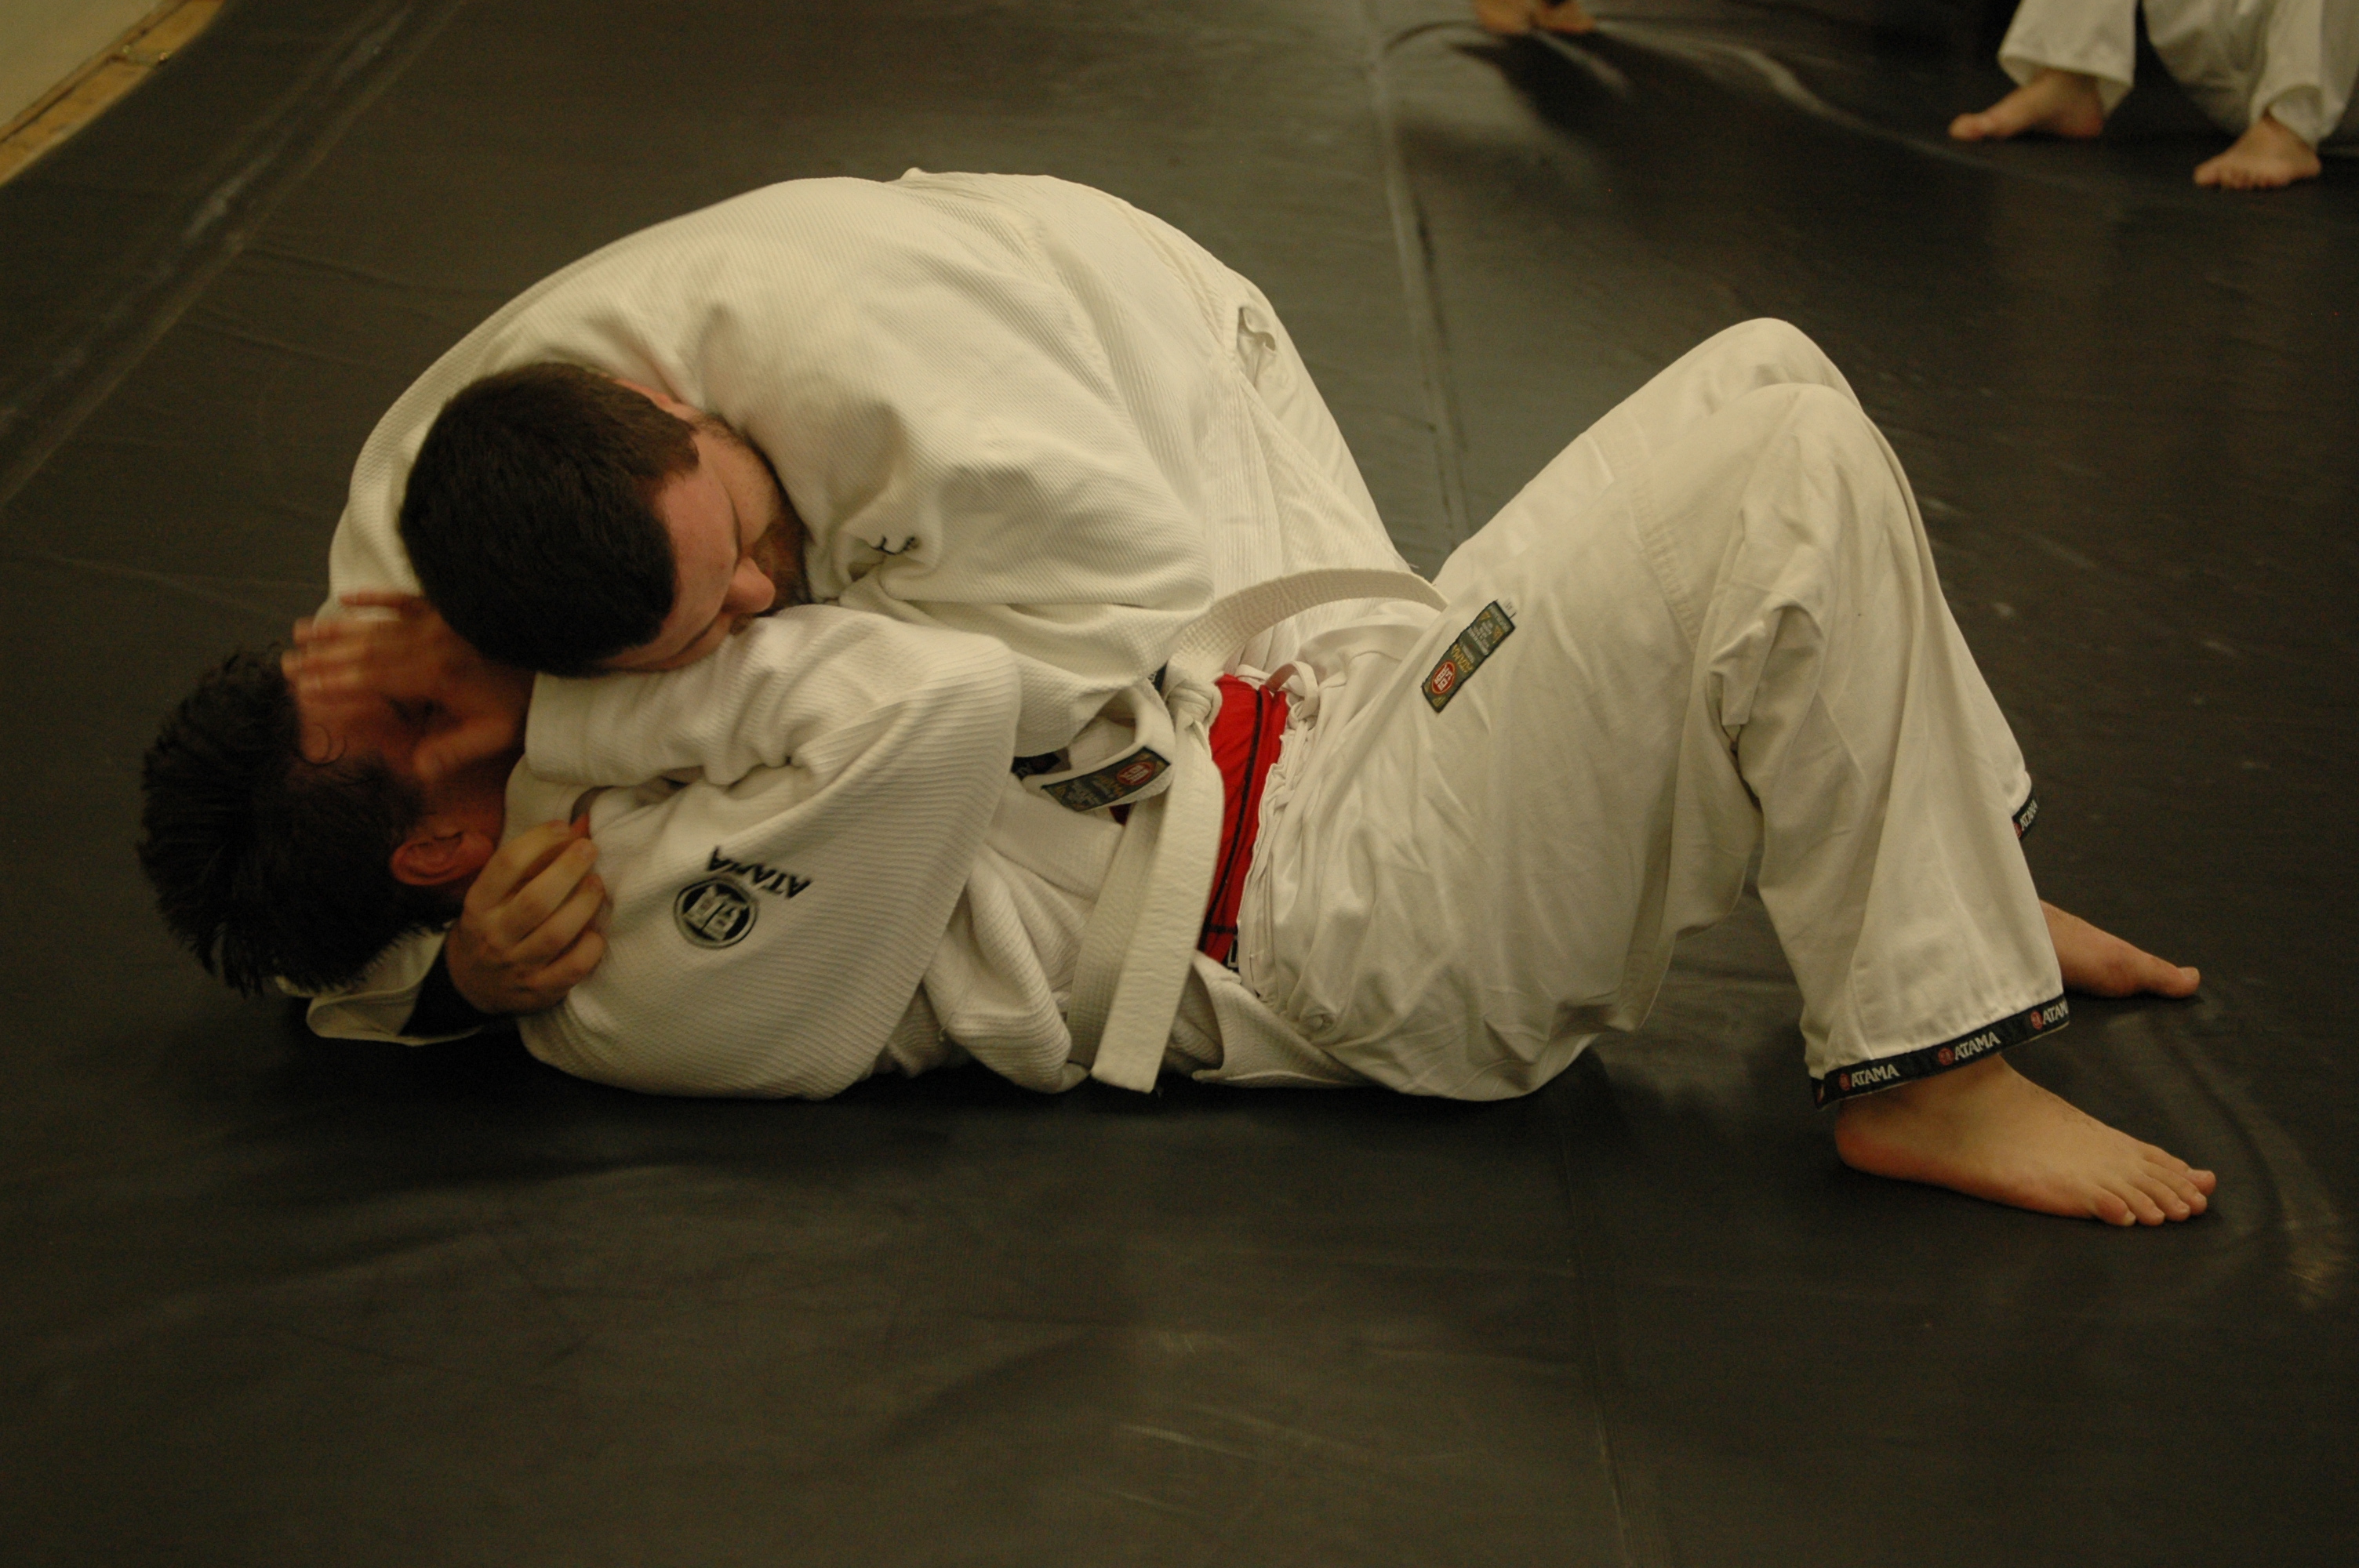 Manchester NH BJJ at Checkmate Martial Arts with Master Danny Dring